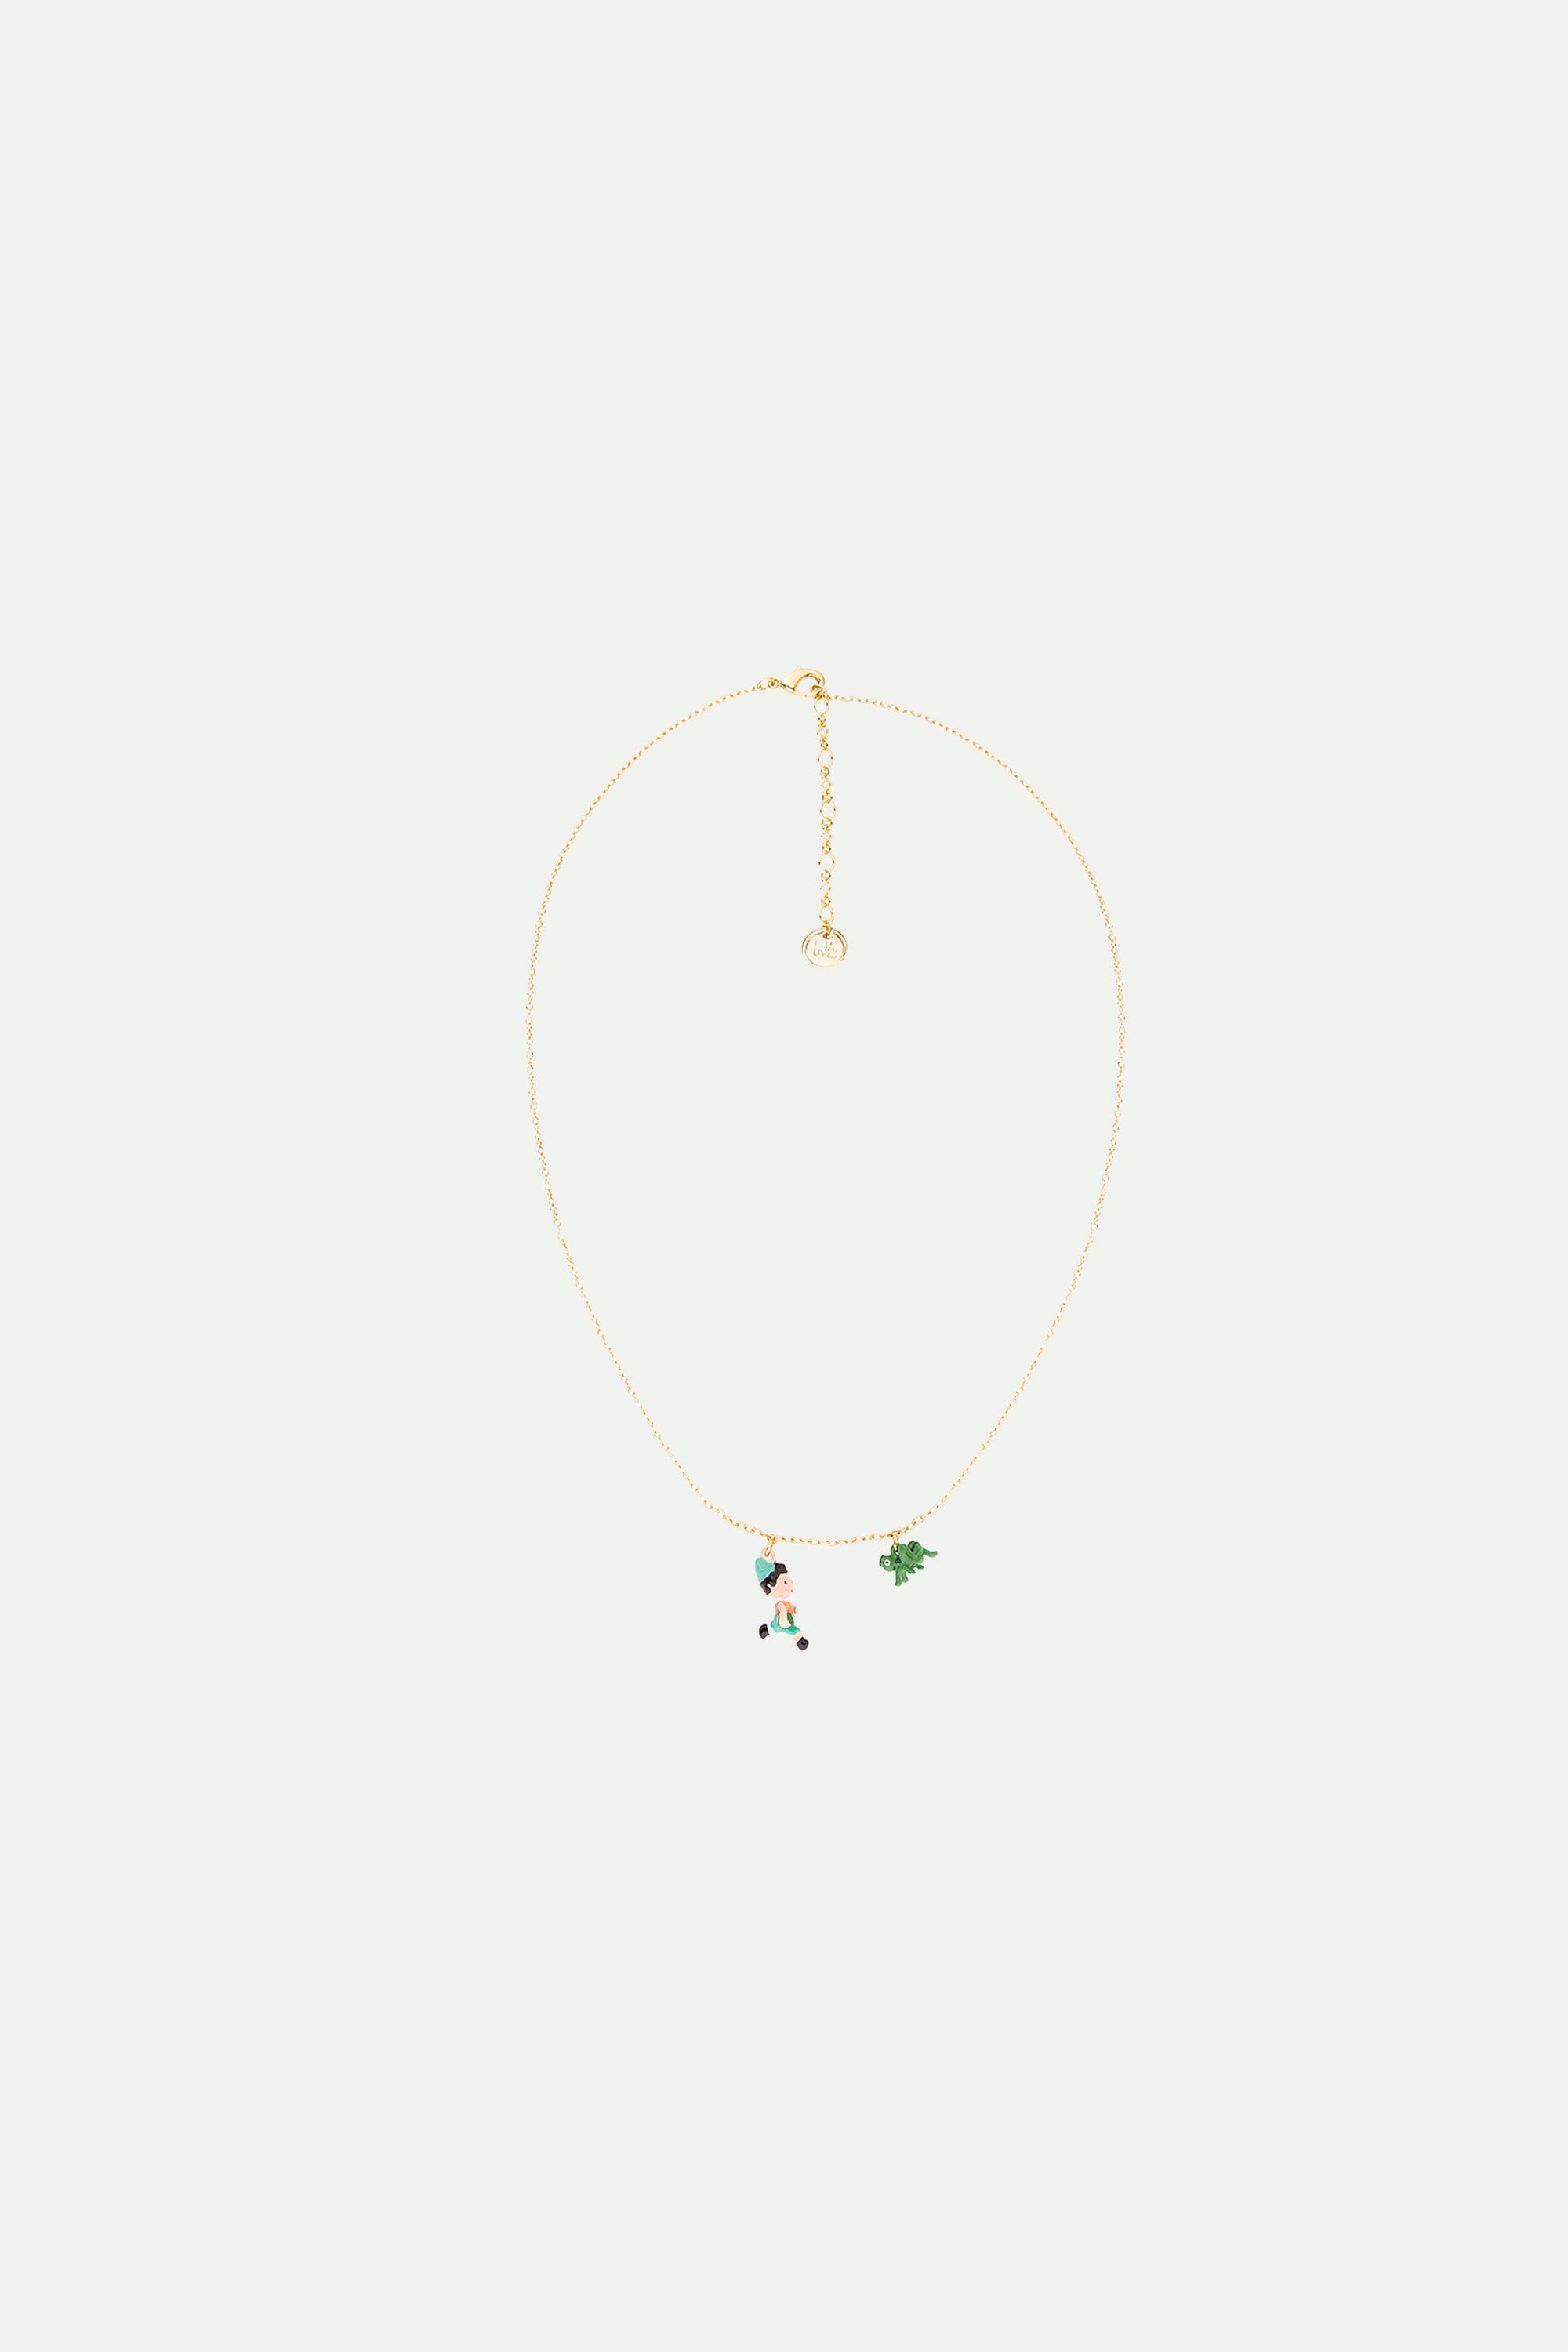 Pinocchio and cricket charm necklace